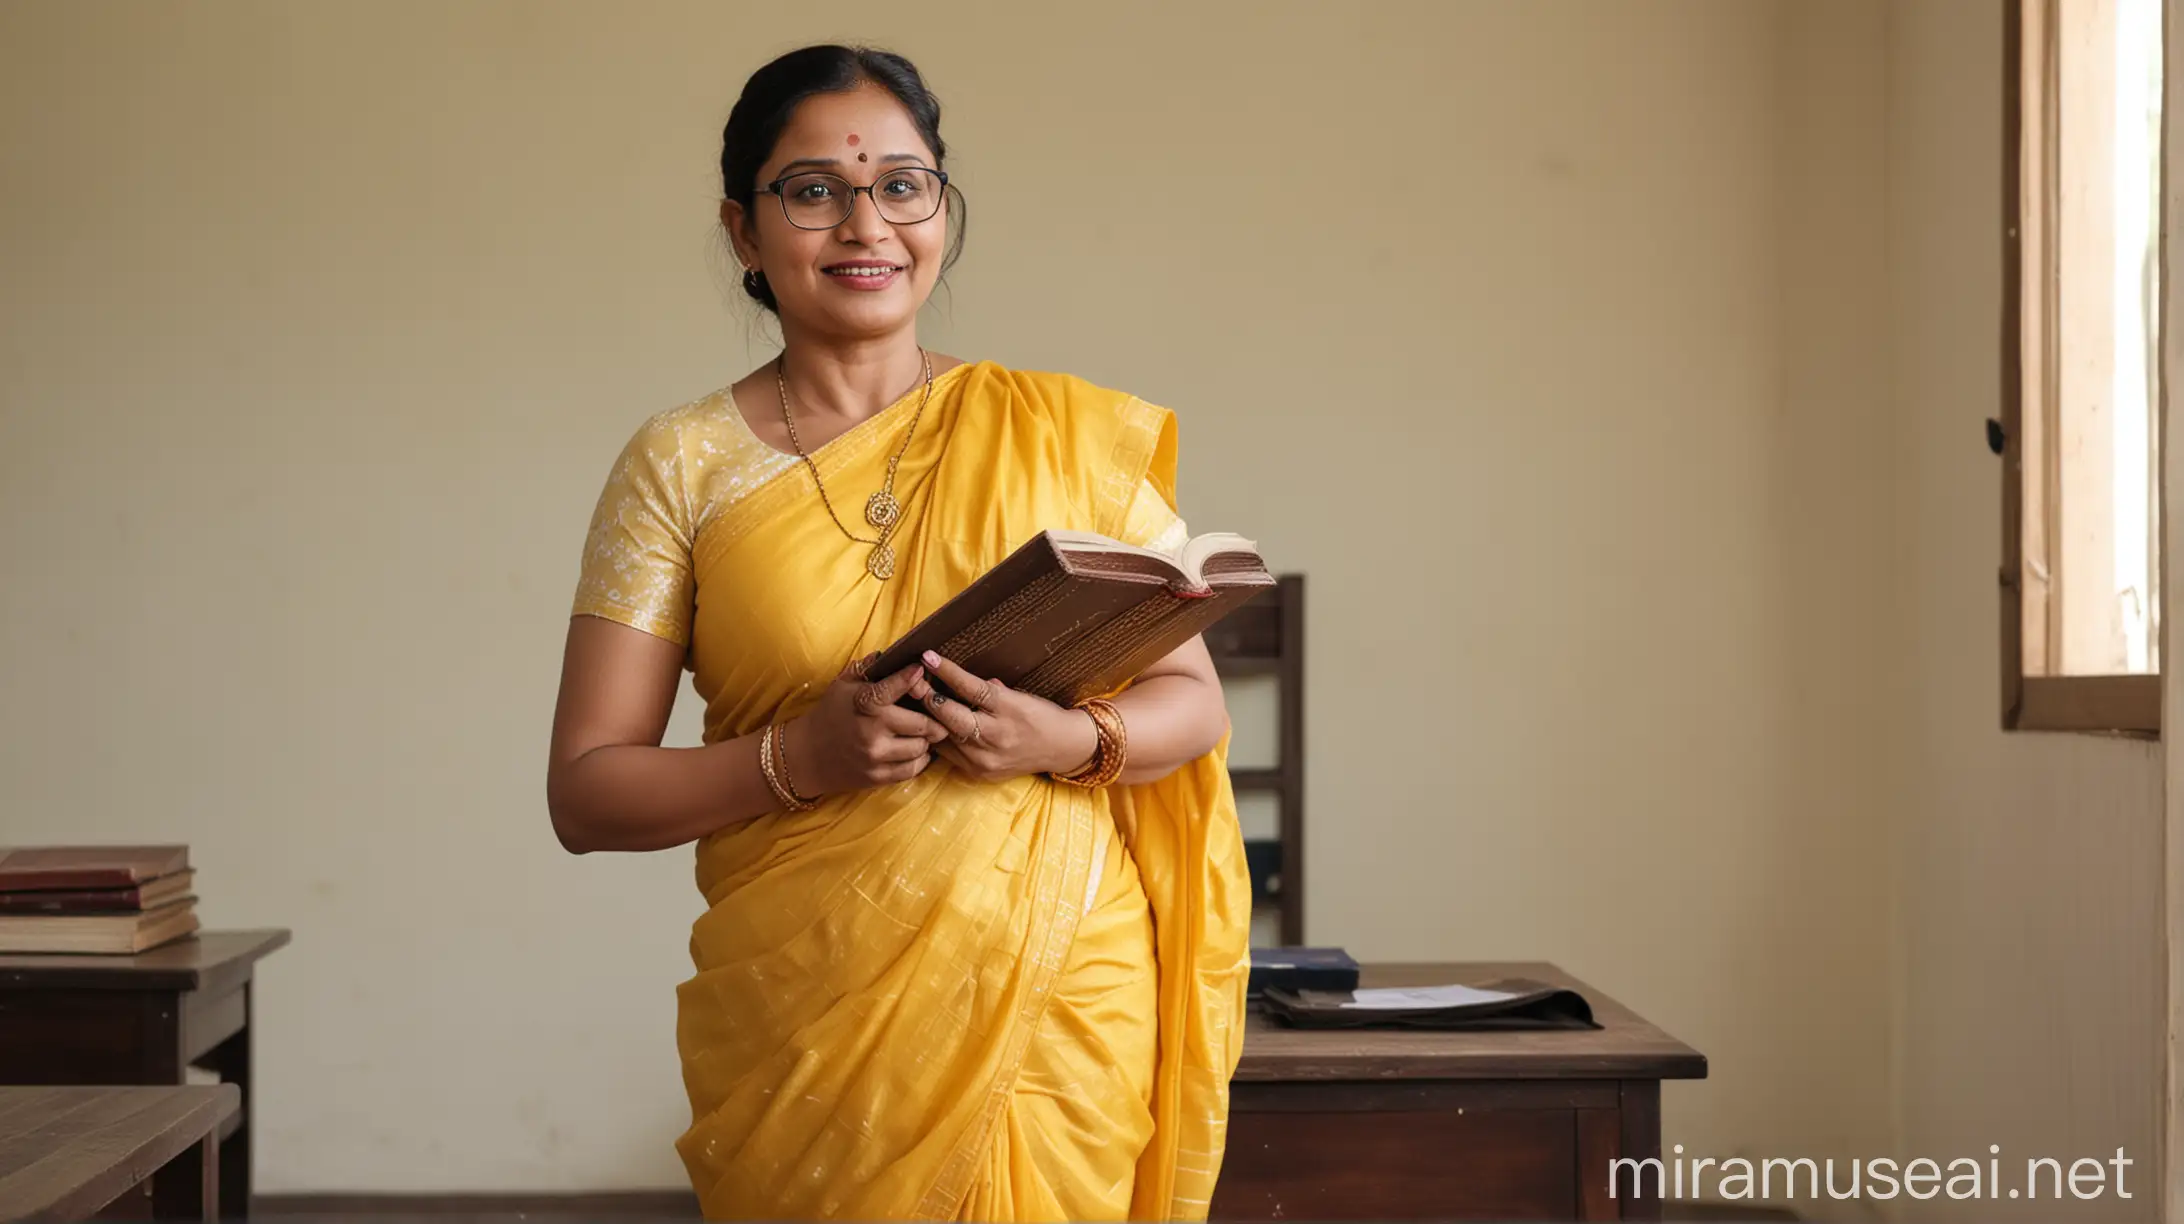  indian teacher mom 47 years old  fat and holding a book in class room wearing sindur, and magalsutra . and wearing a spectacles on face. and she is surprised and standing with heels on feet. she is wearing yello saree and white blouse.